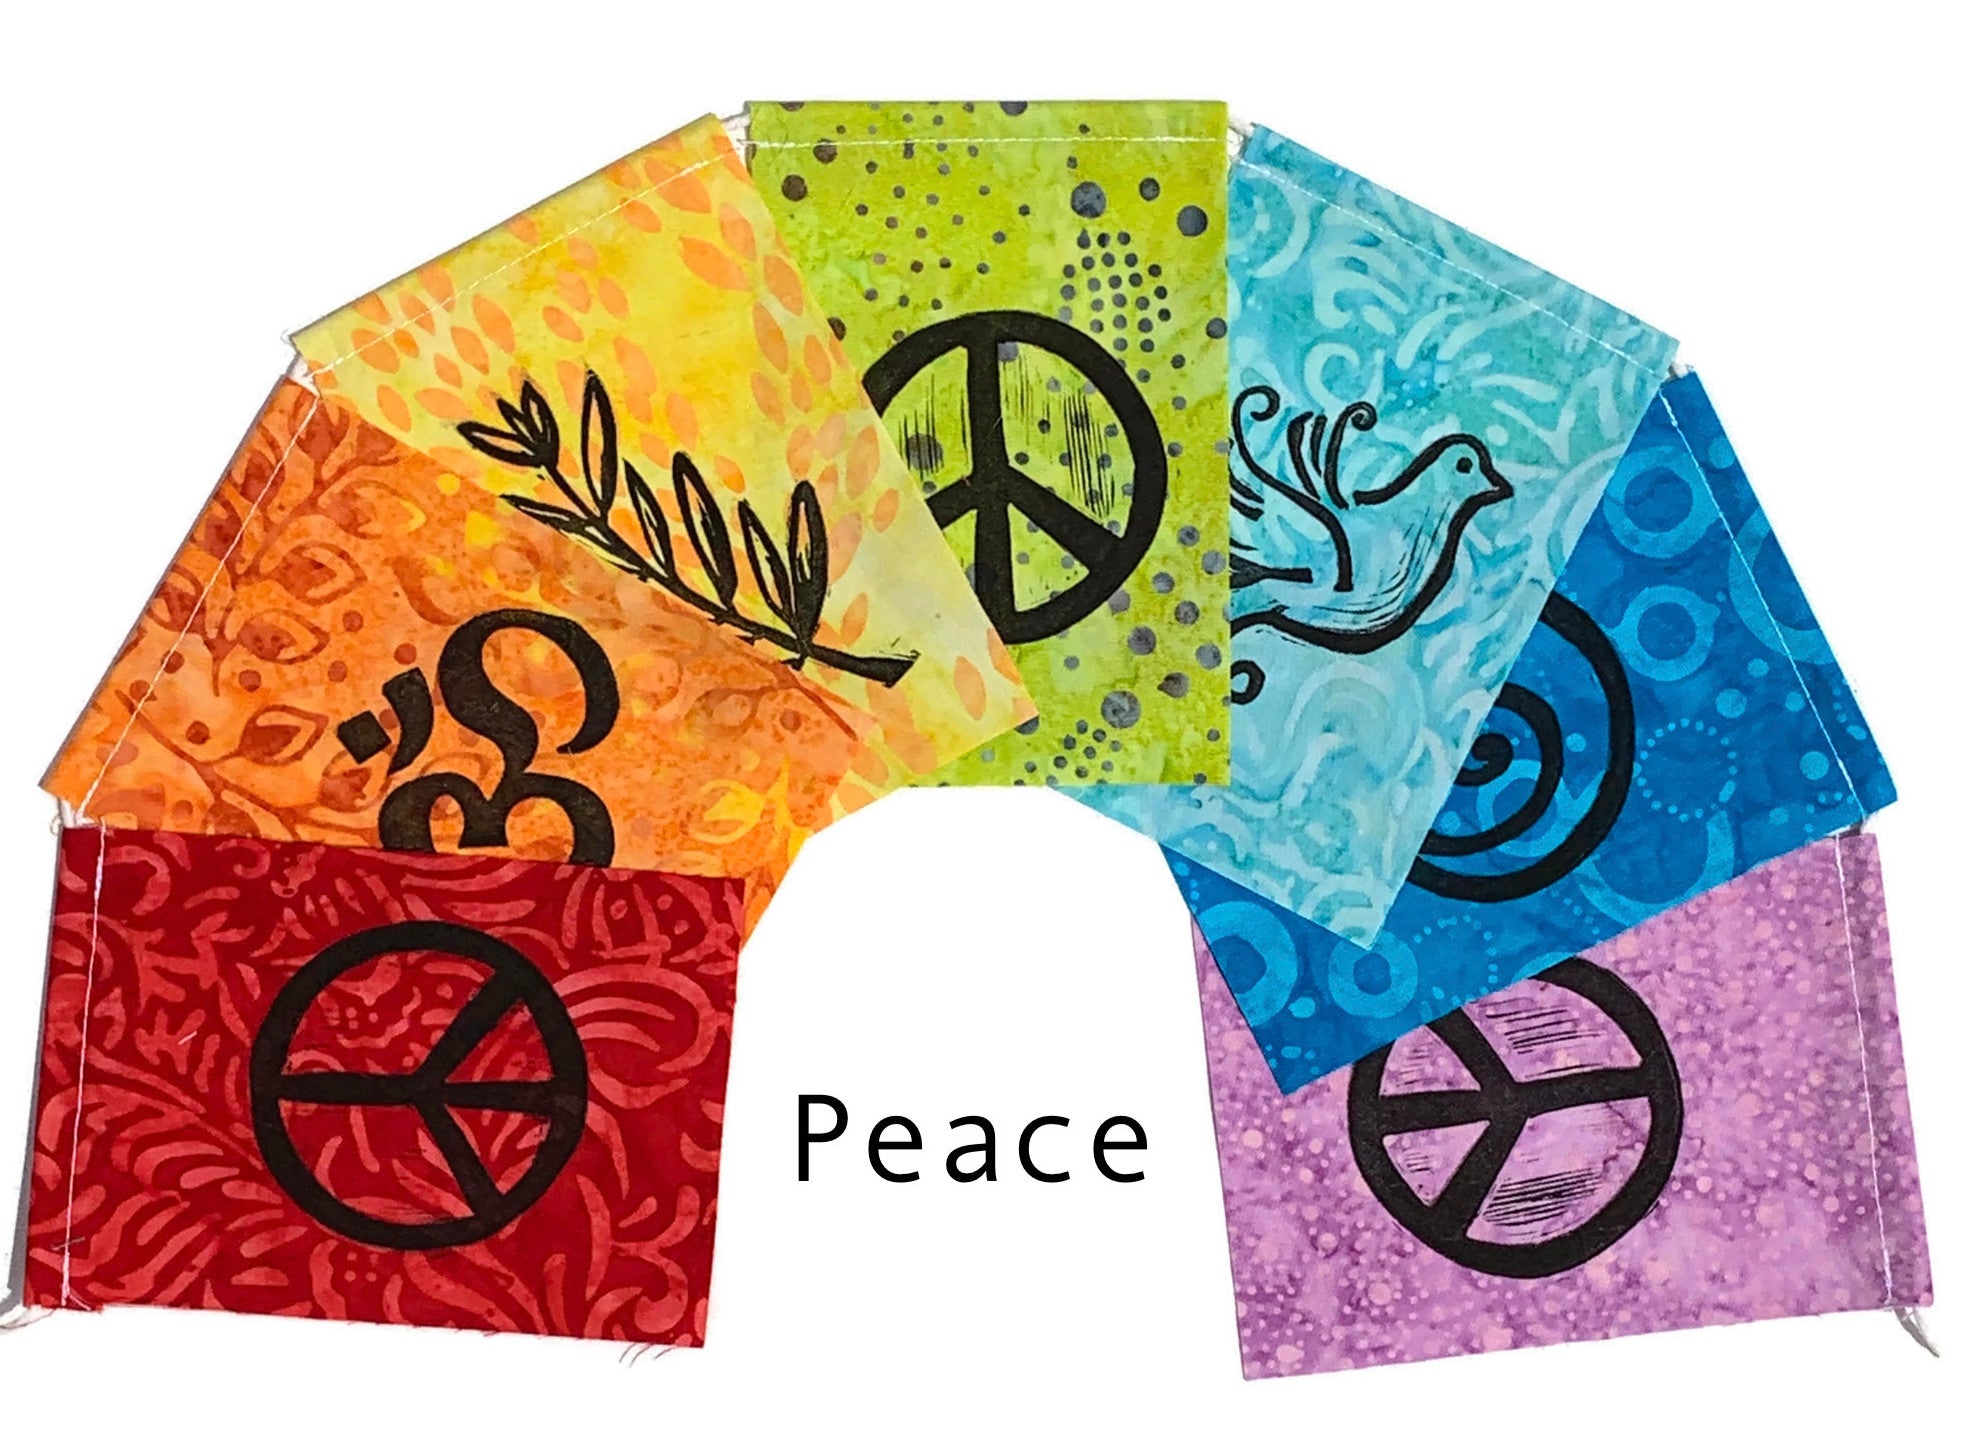 Small Flag Set with images of peace signs handprinted on them